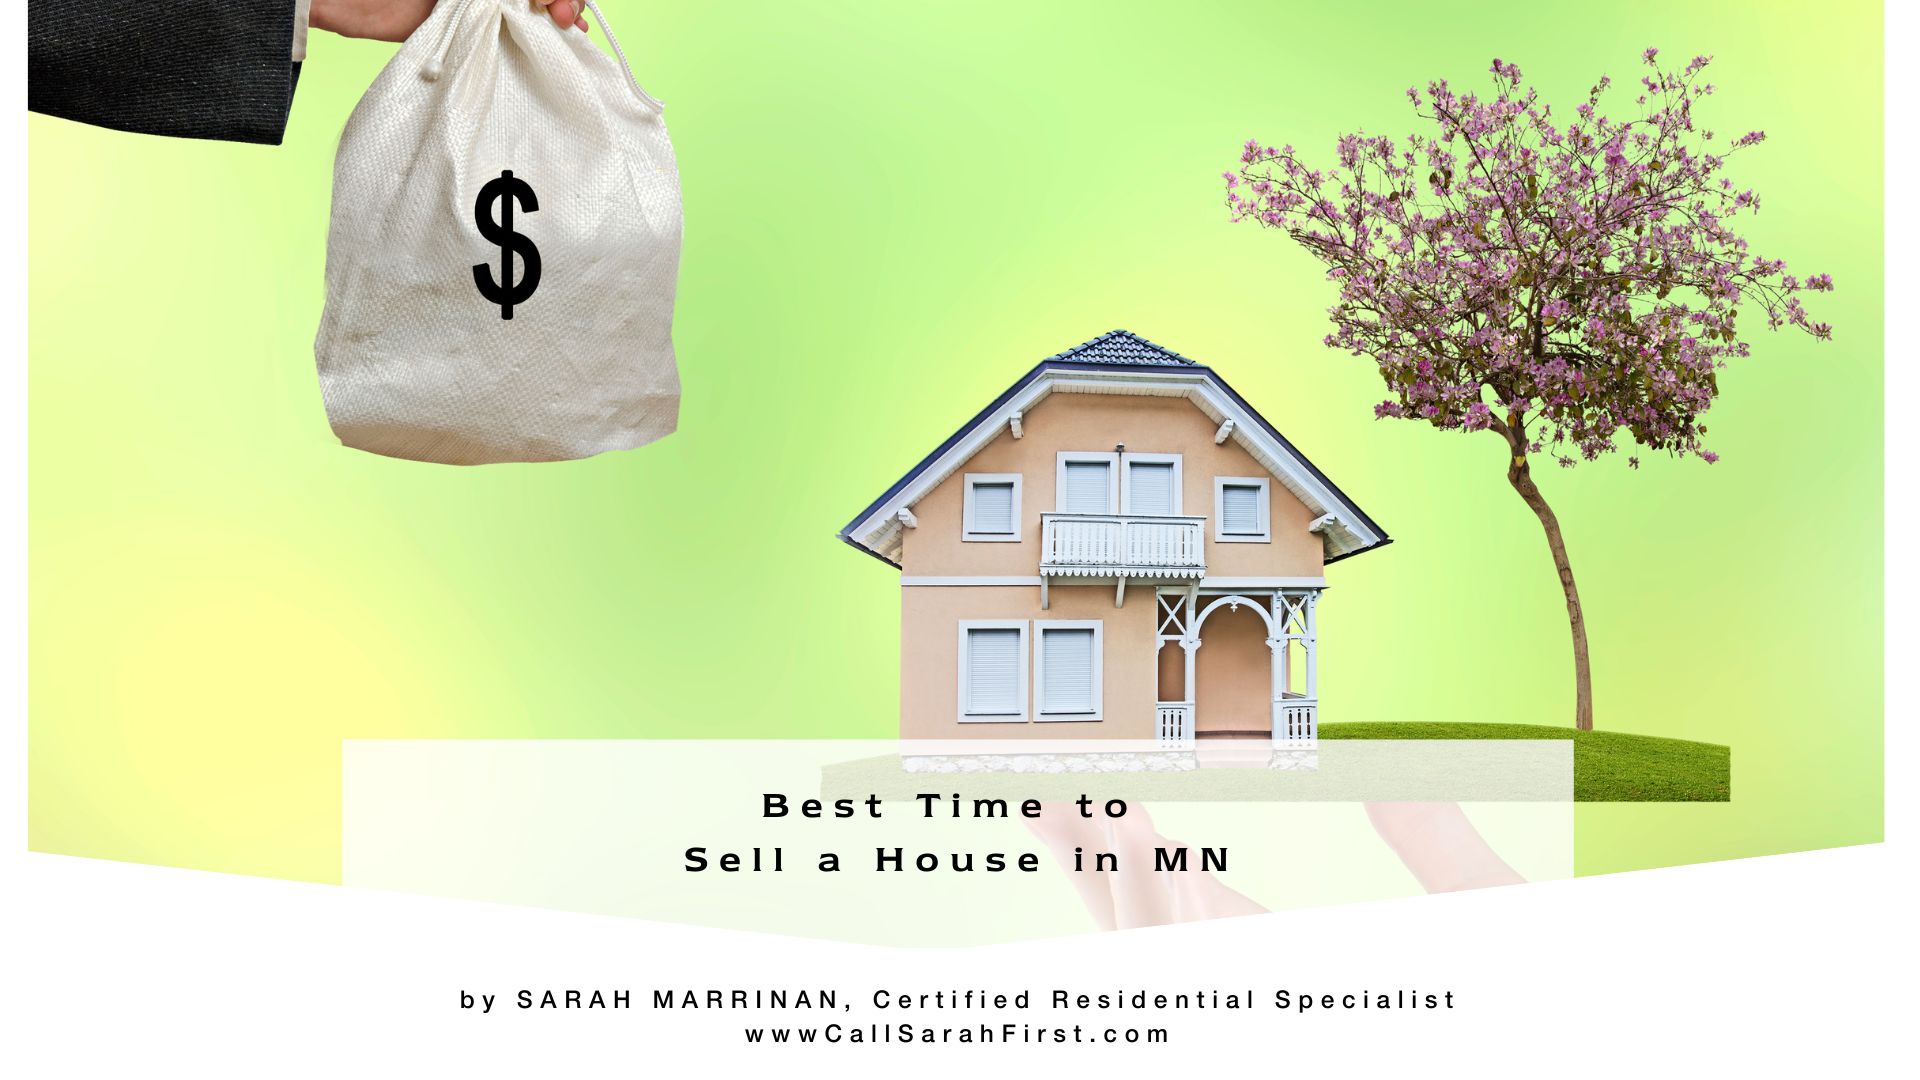 Best time to sell a house in MN